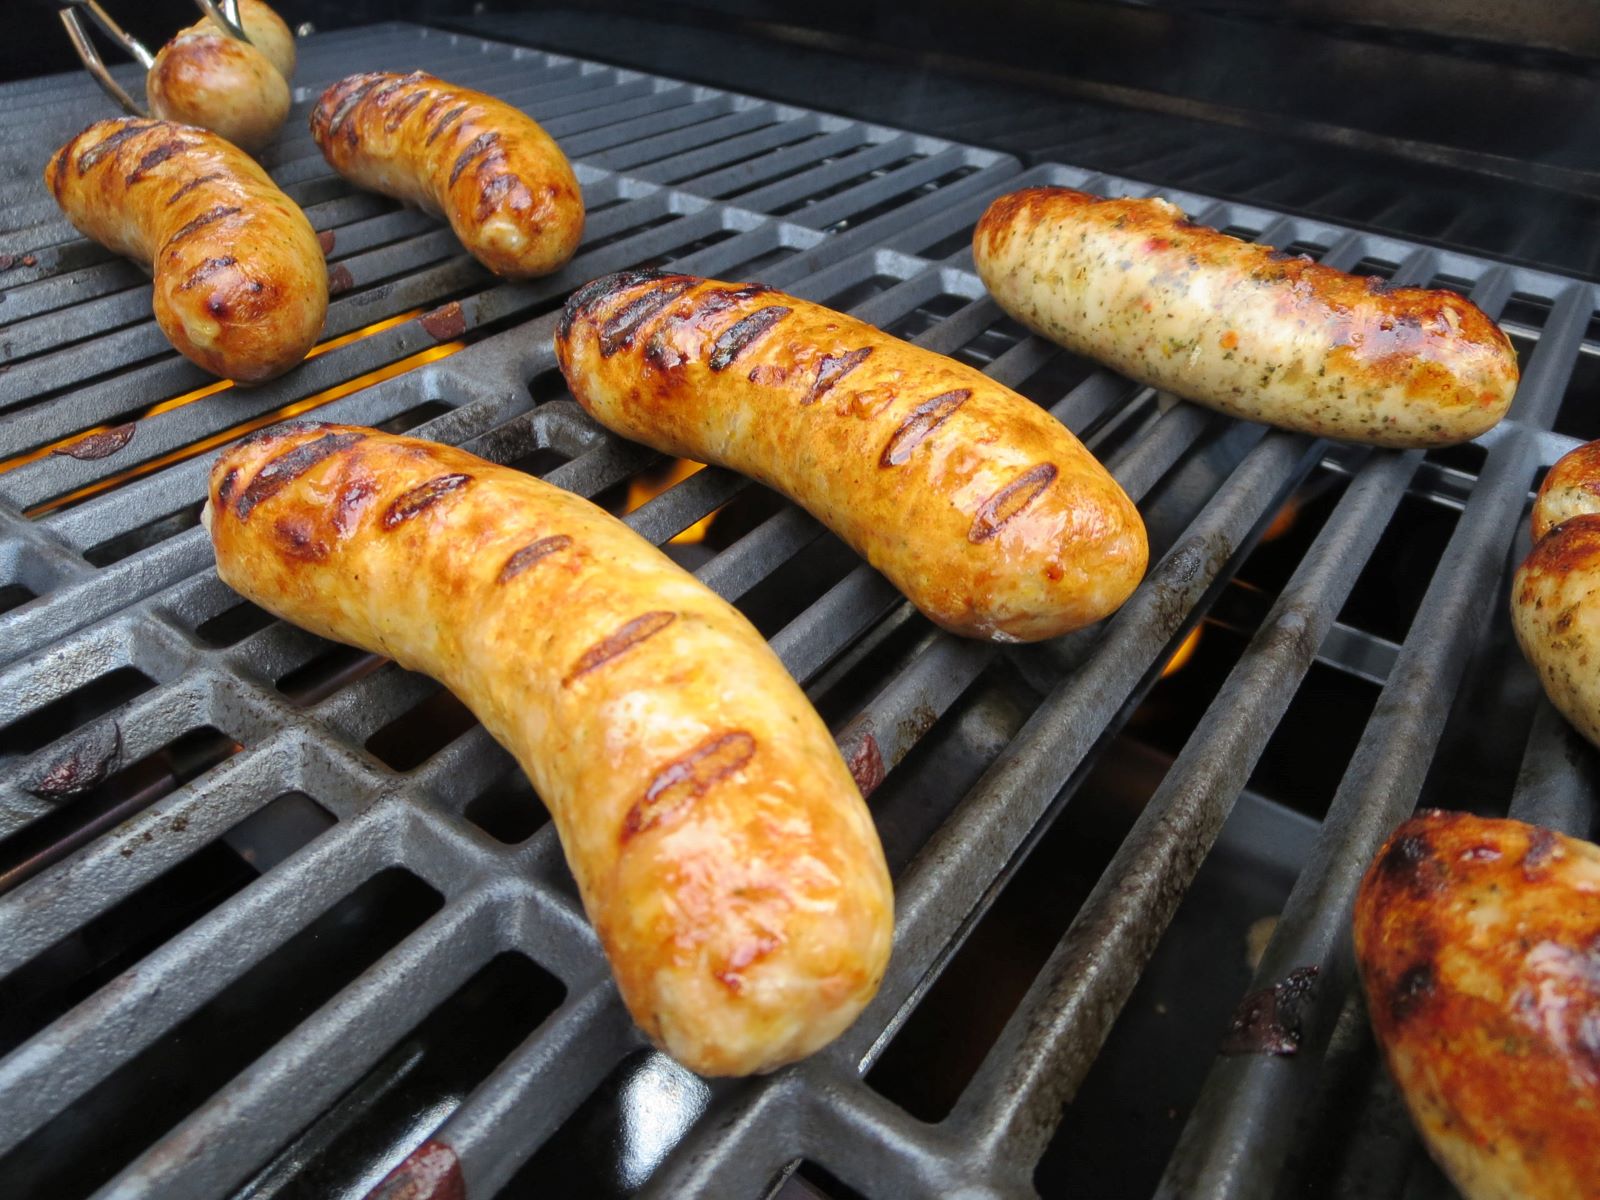 The Perfect Temperature To Cook Sausage For Juicy And Delicious Results!